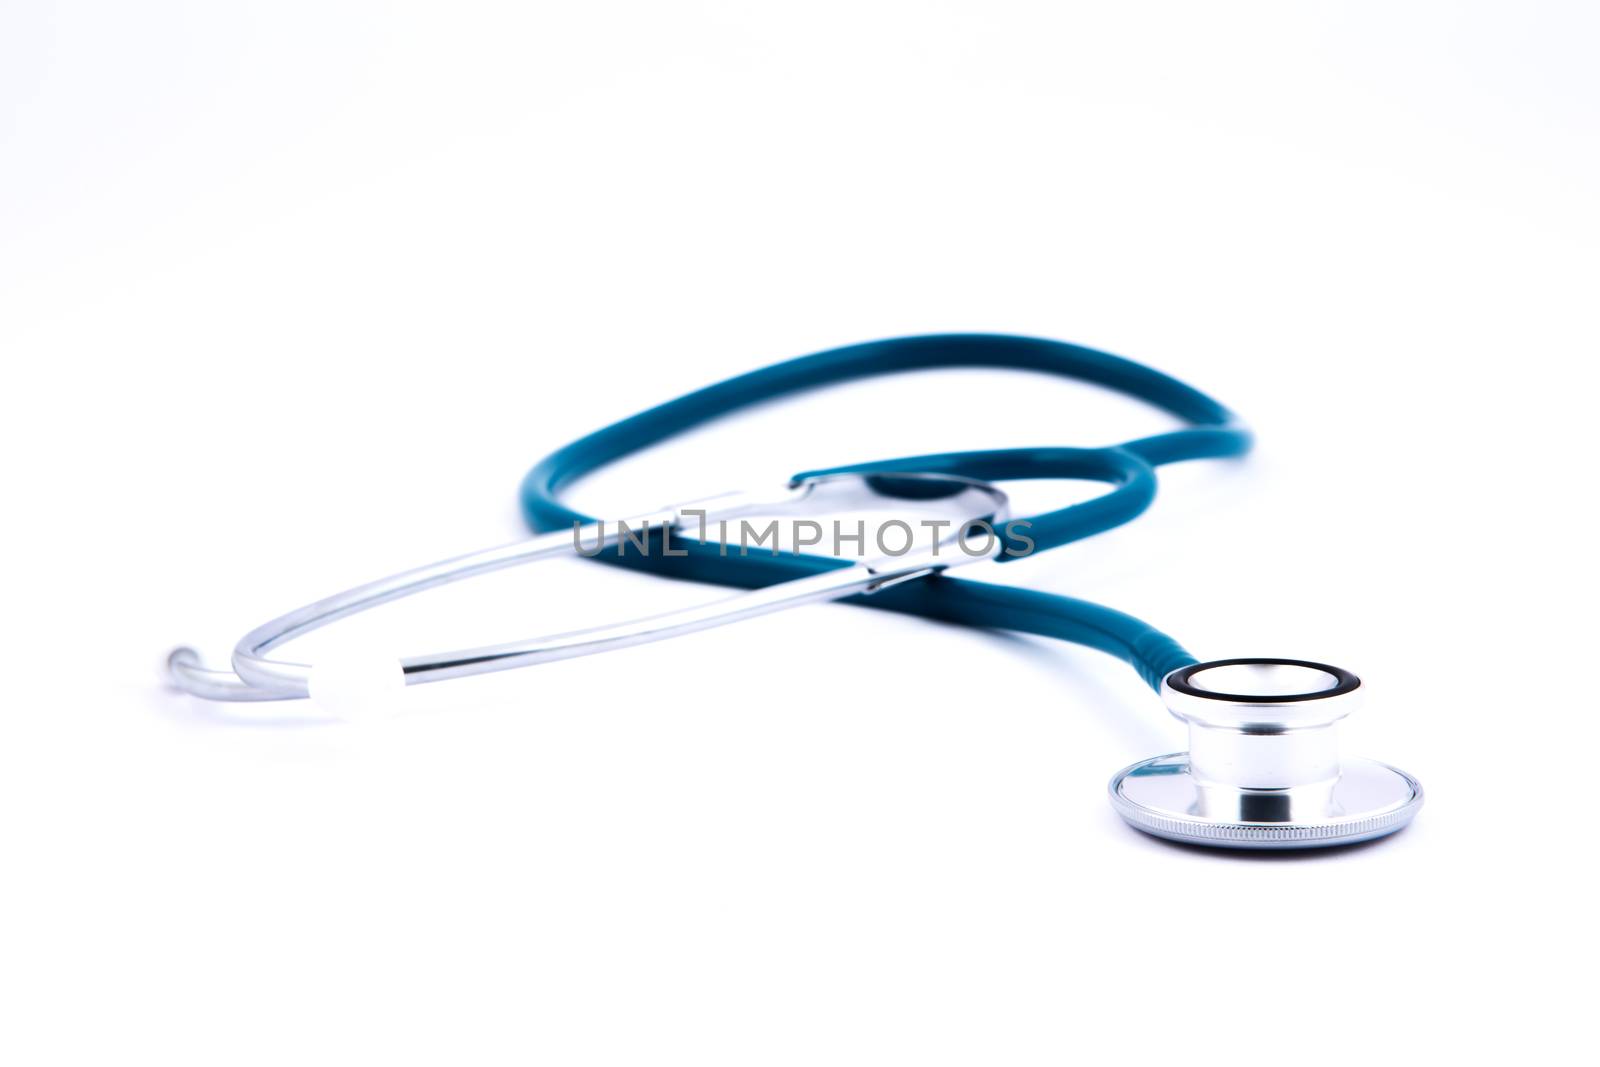 a medical stethoscope on a white background by rufous